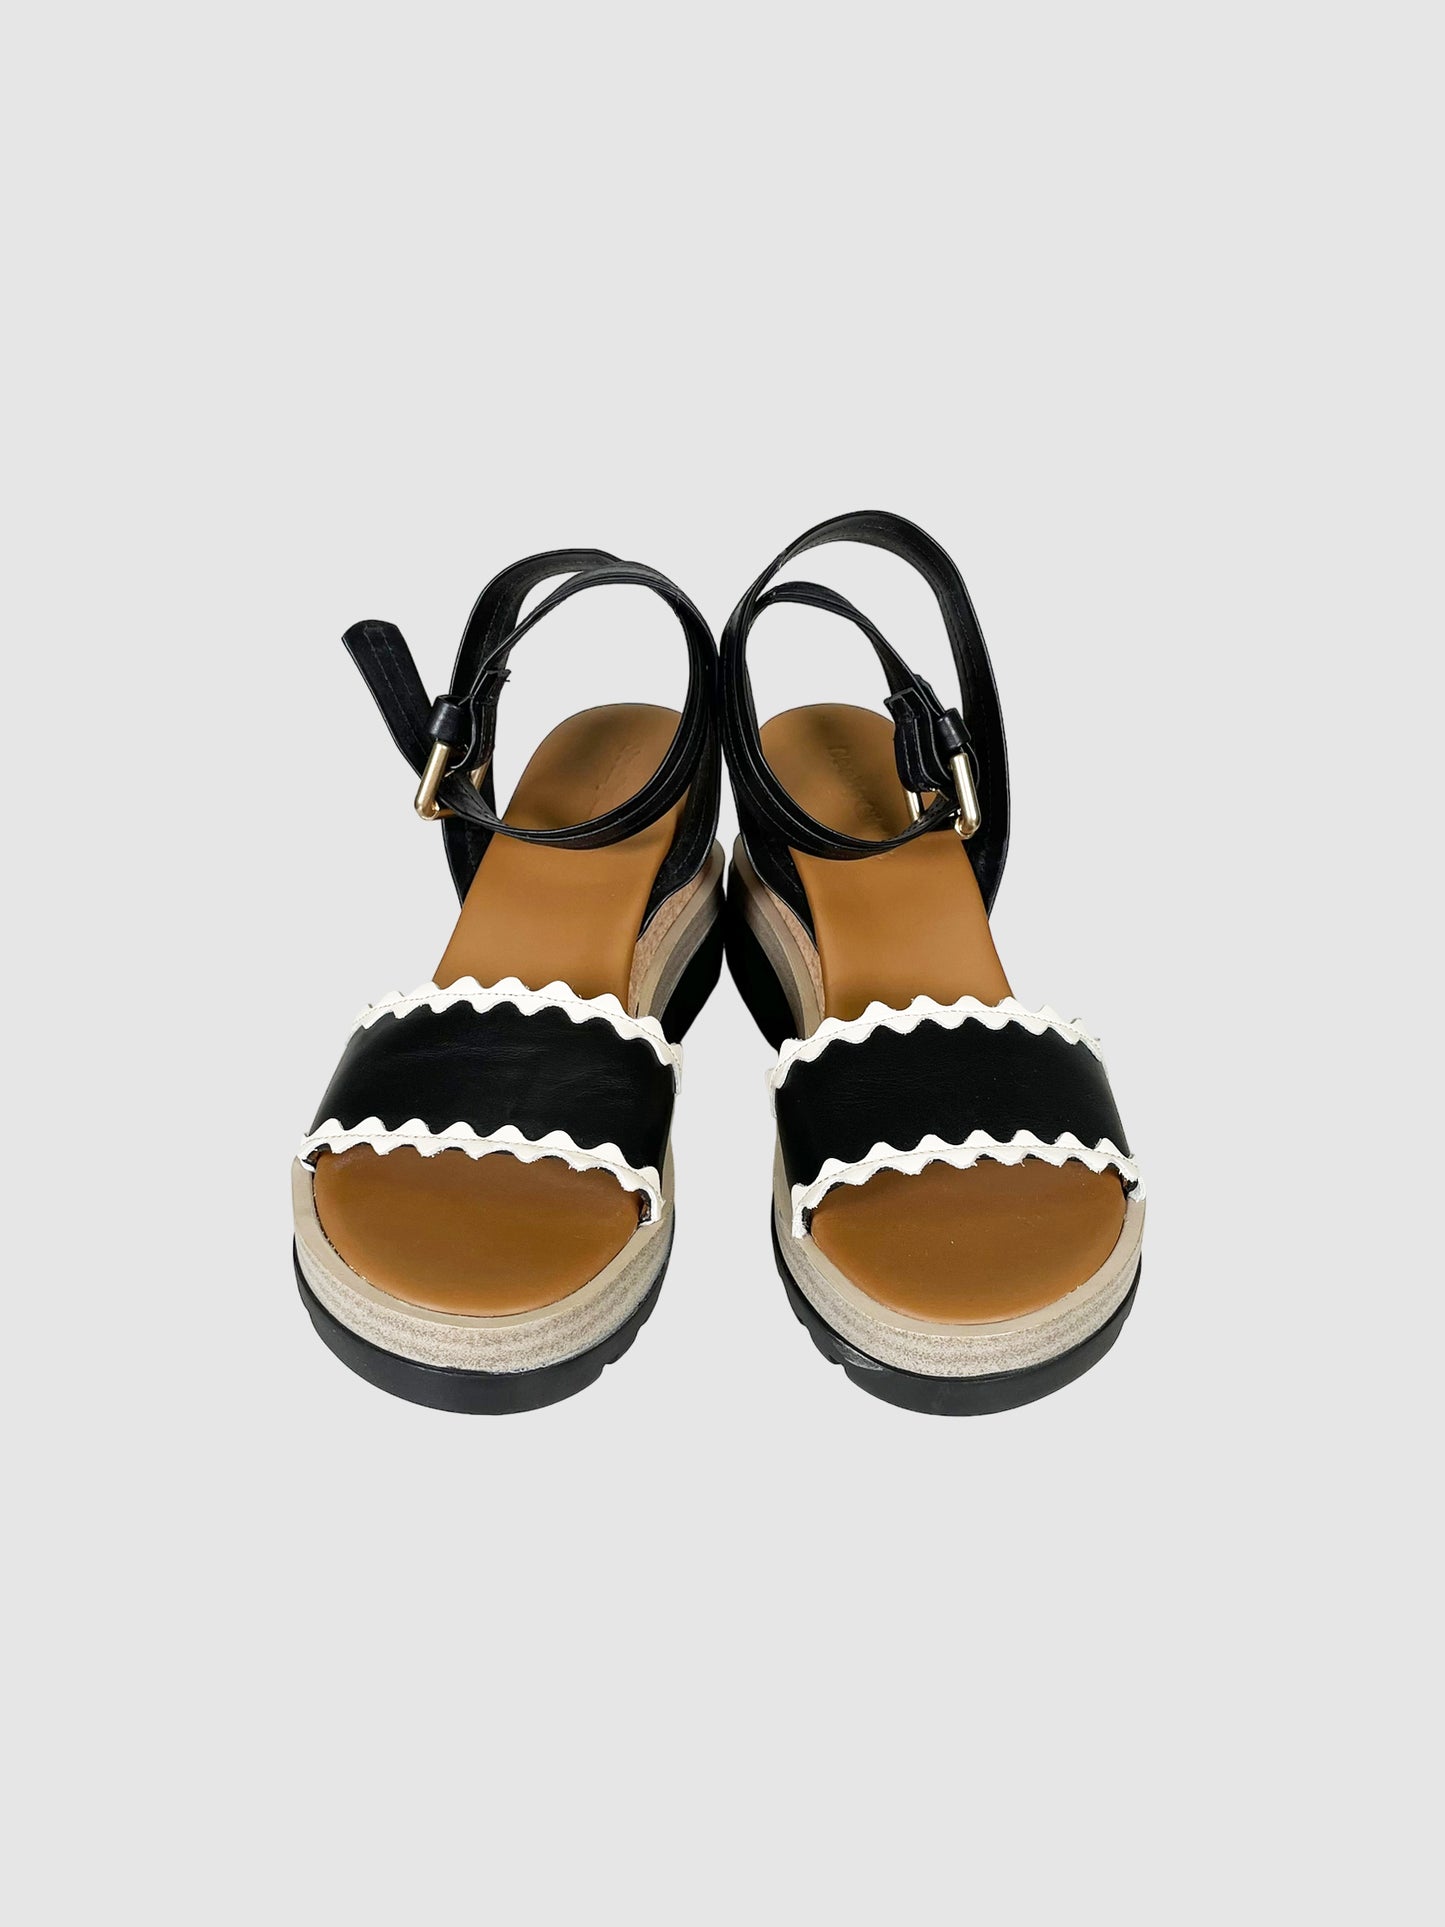 See by Chloe Platform Sandals - Size 36